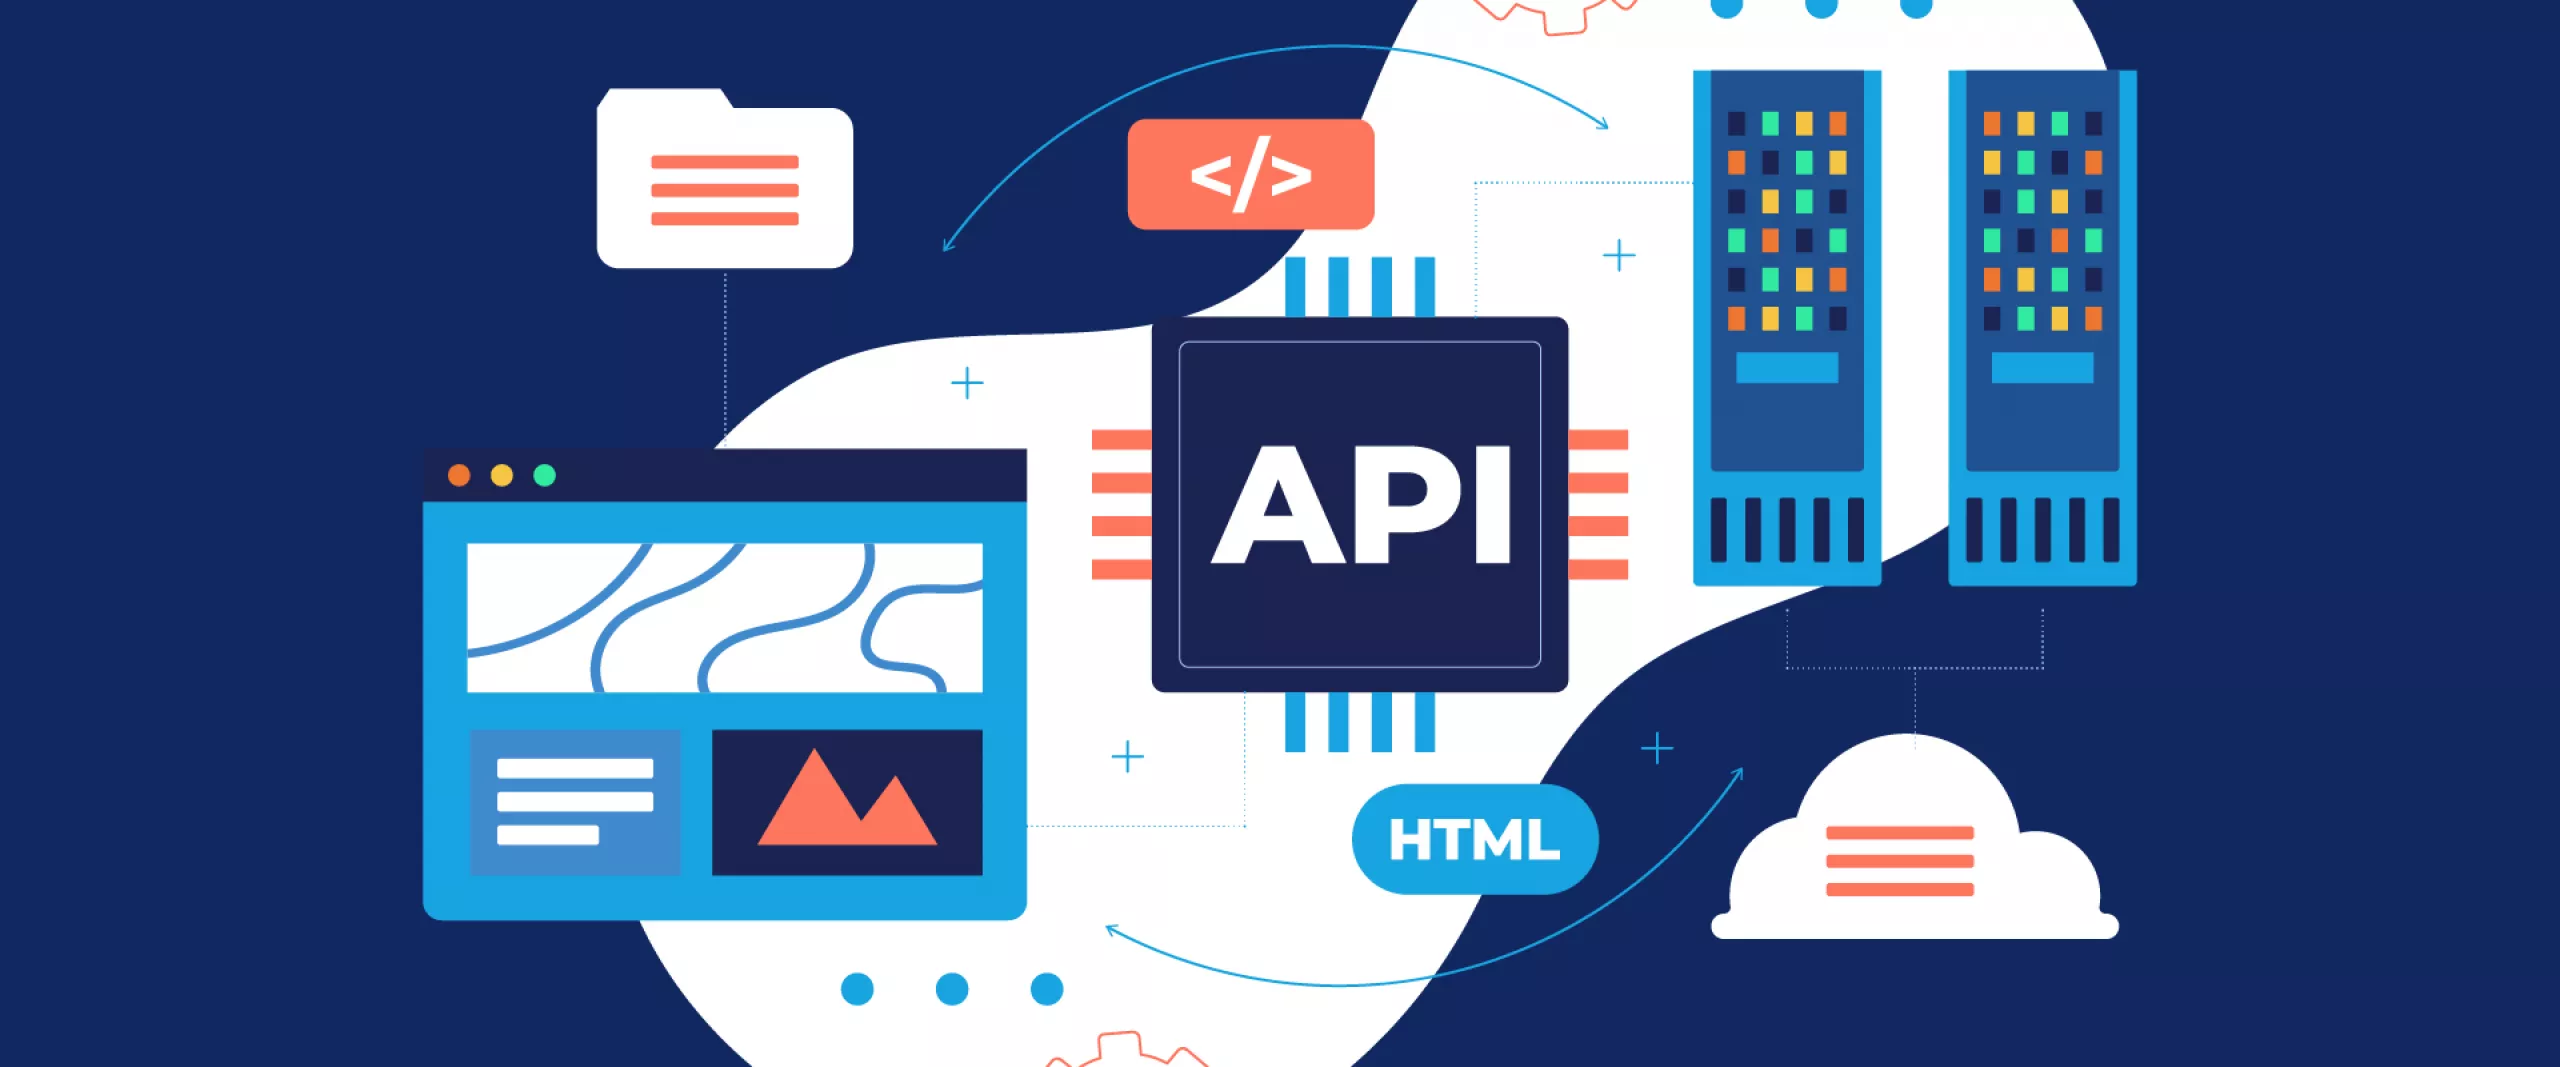 Web Scraping vs API: What's the Best Way to Extract Data?